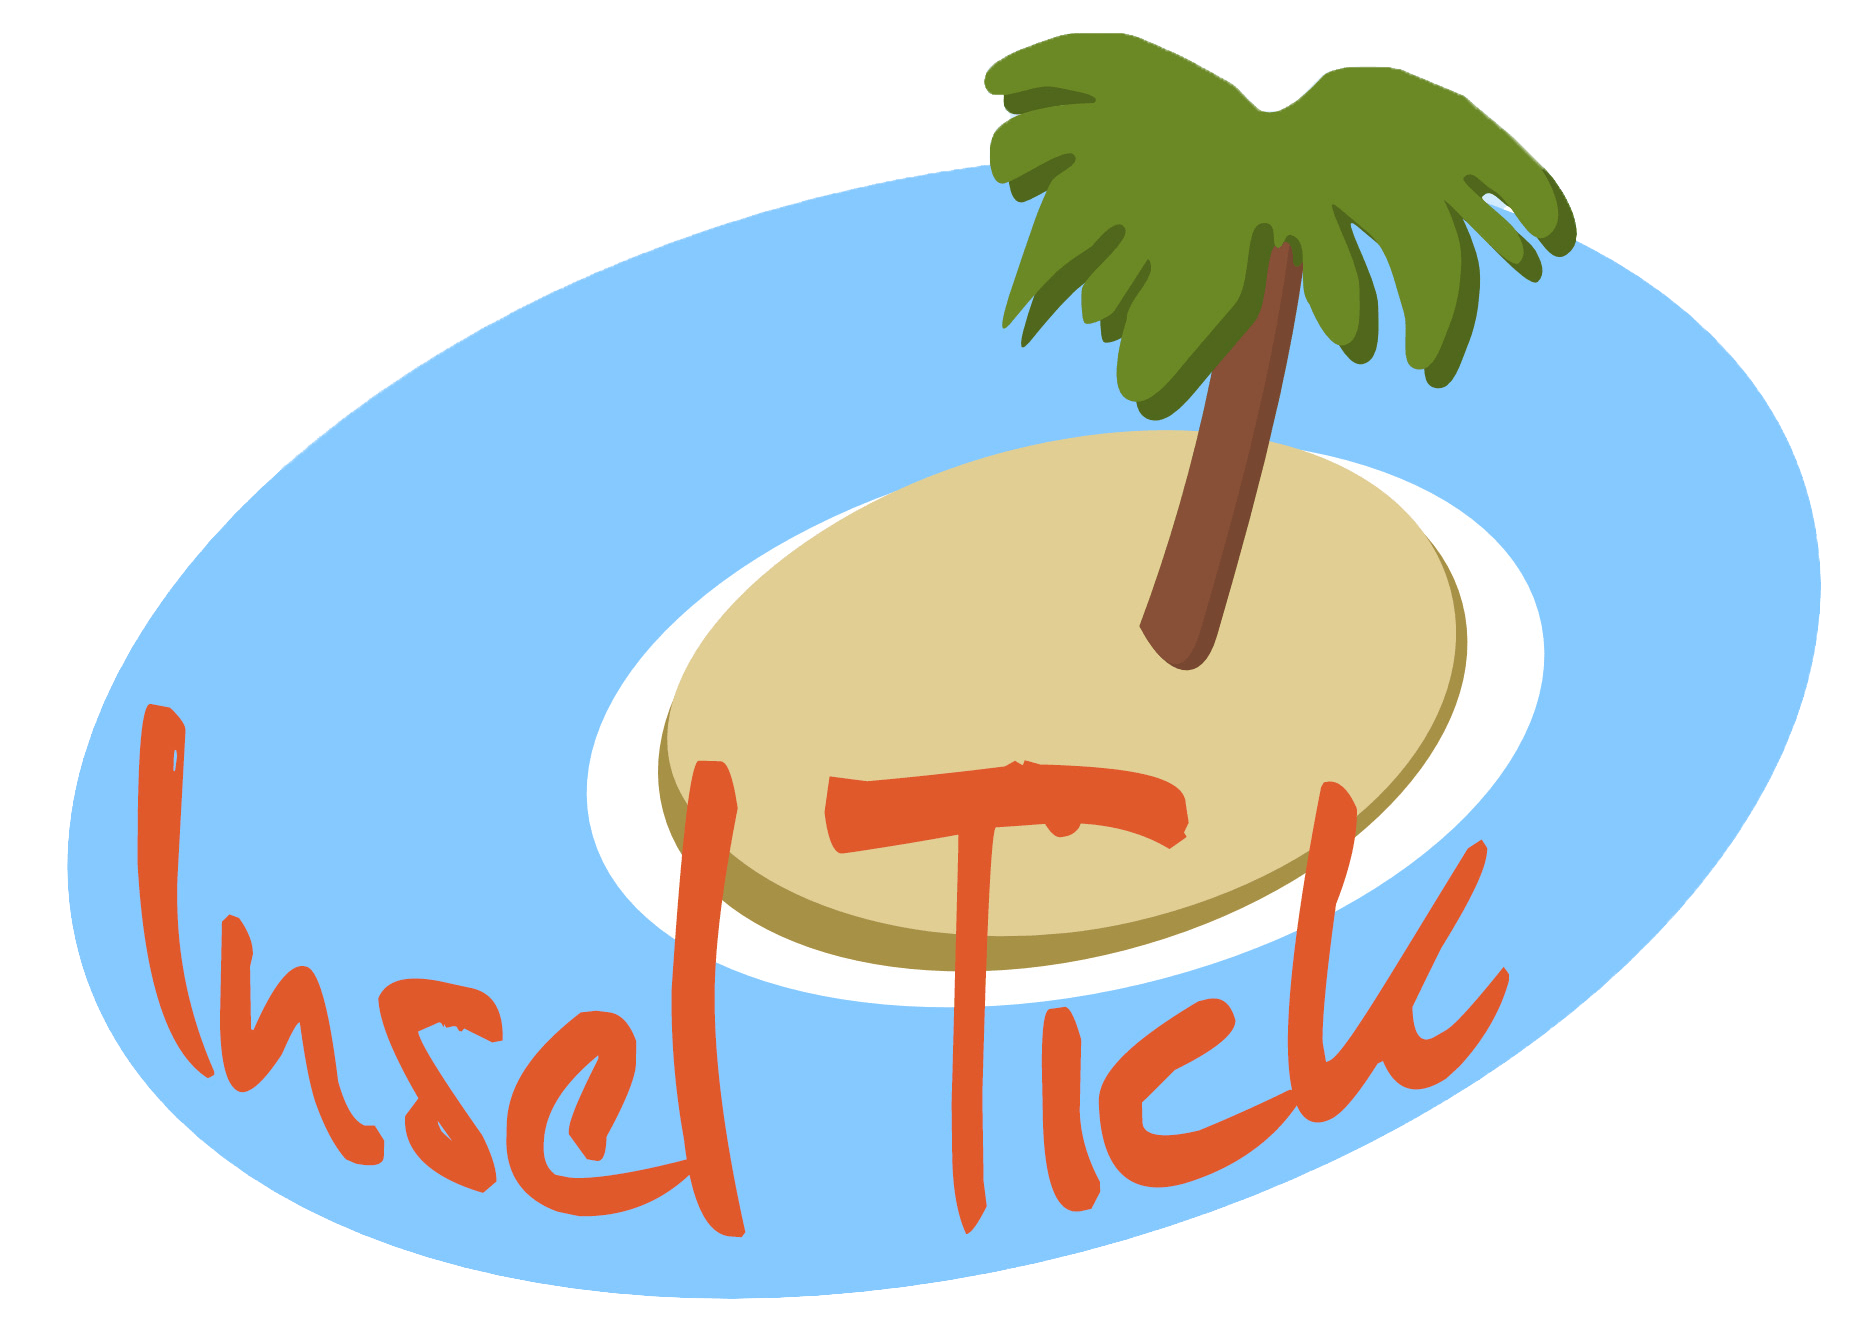 Insel Tick creates affordable websites, logos and flyers